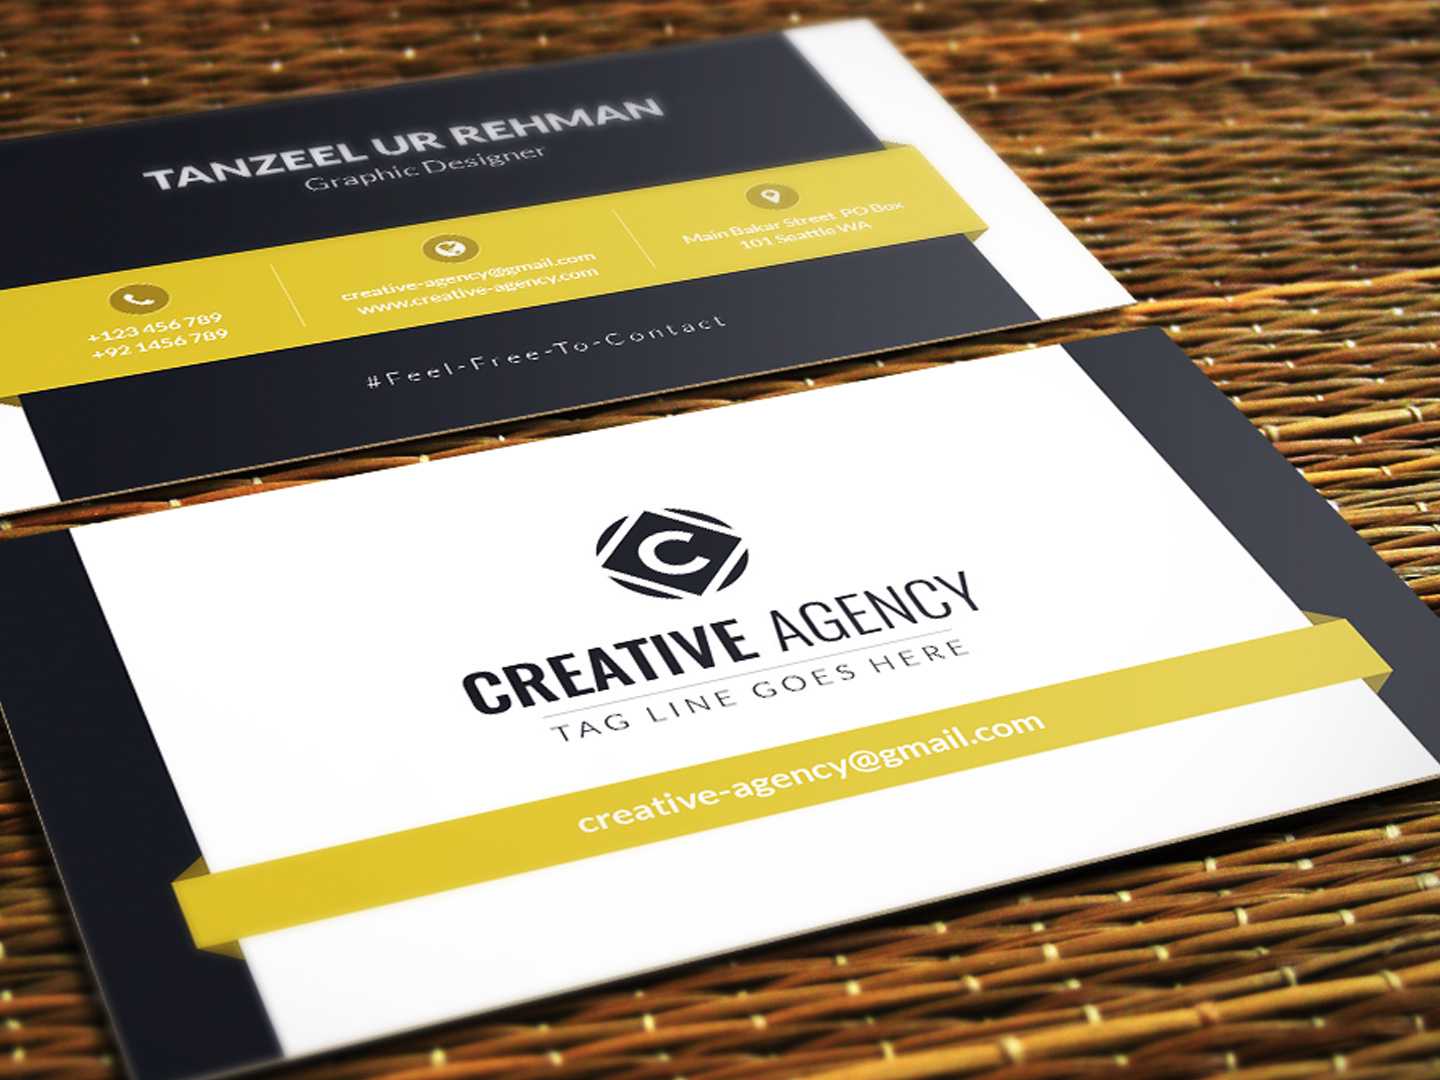 Business Cards Template – Free Downloadtanzeel Ur Rehman Within Templates For Visiting Cards Free Downloads